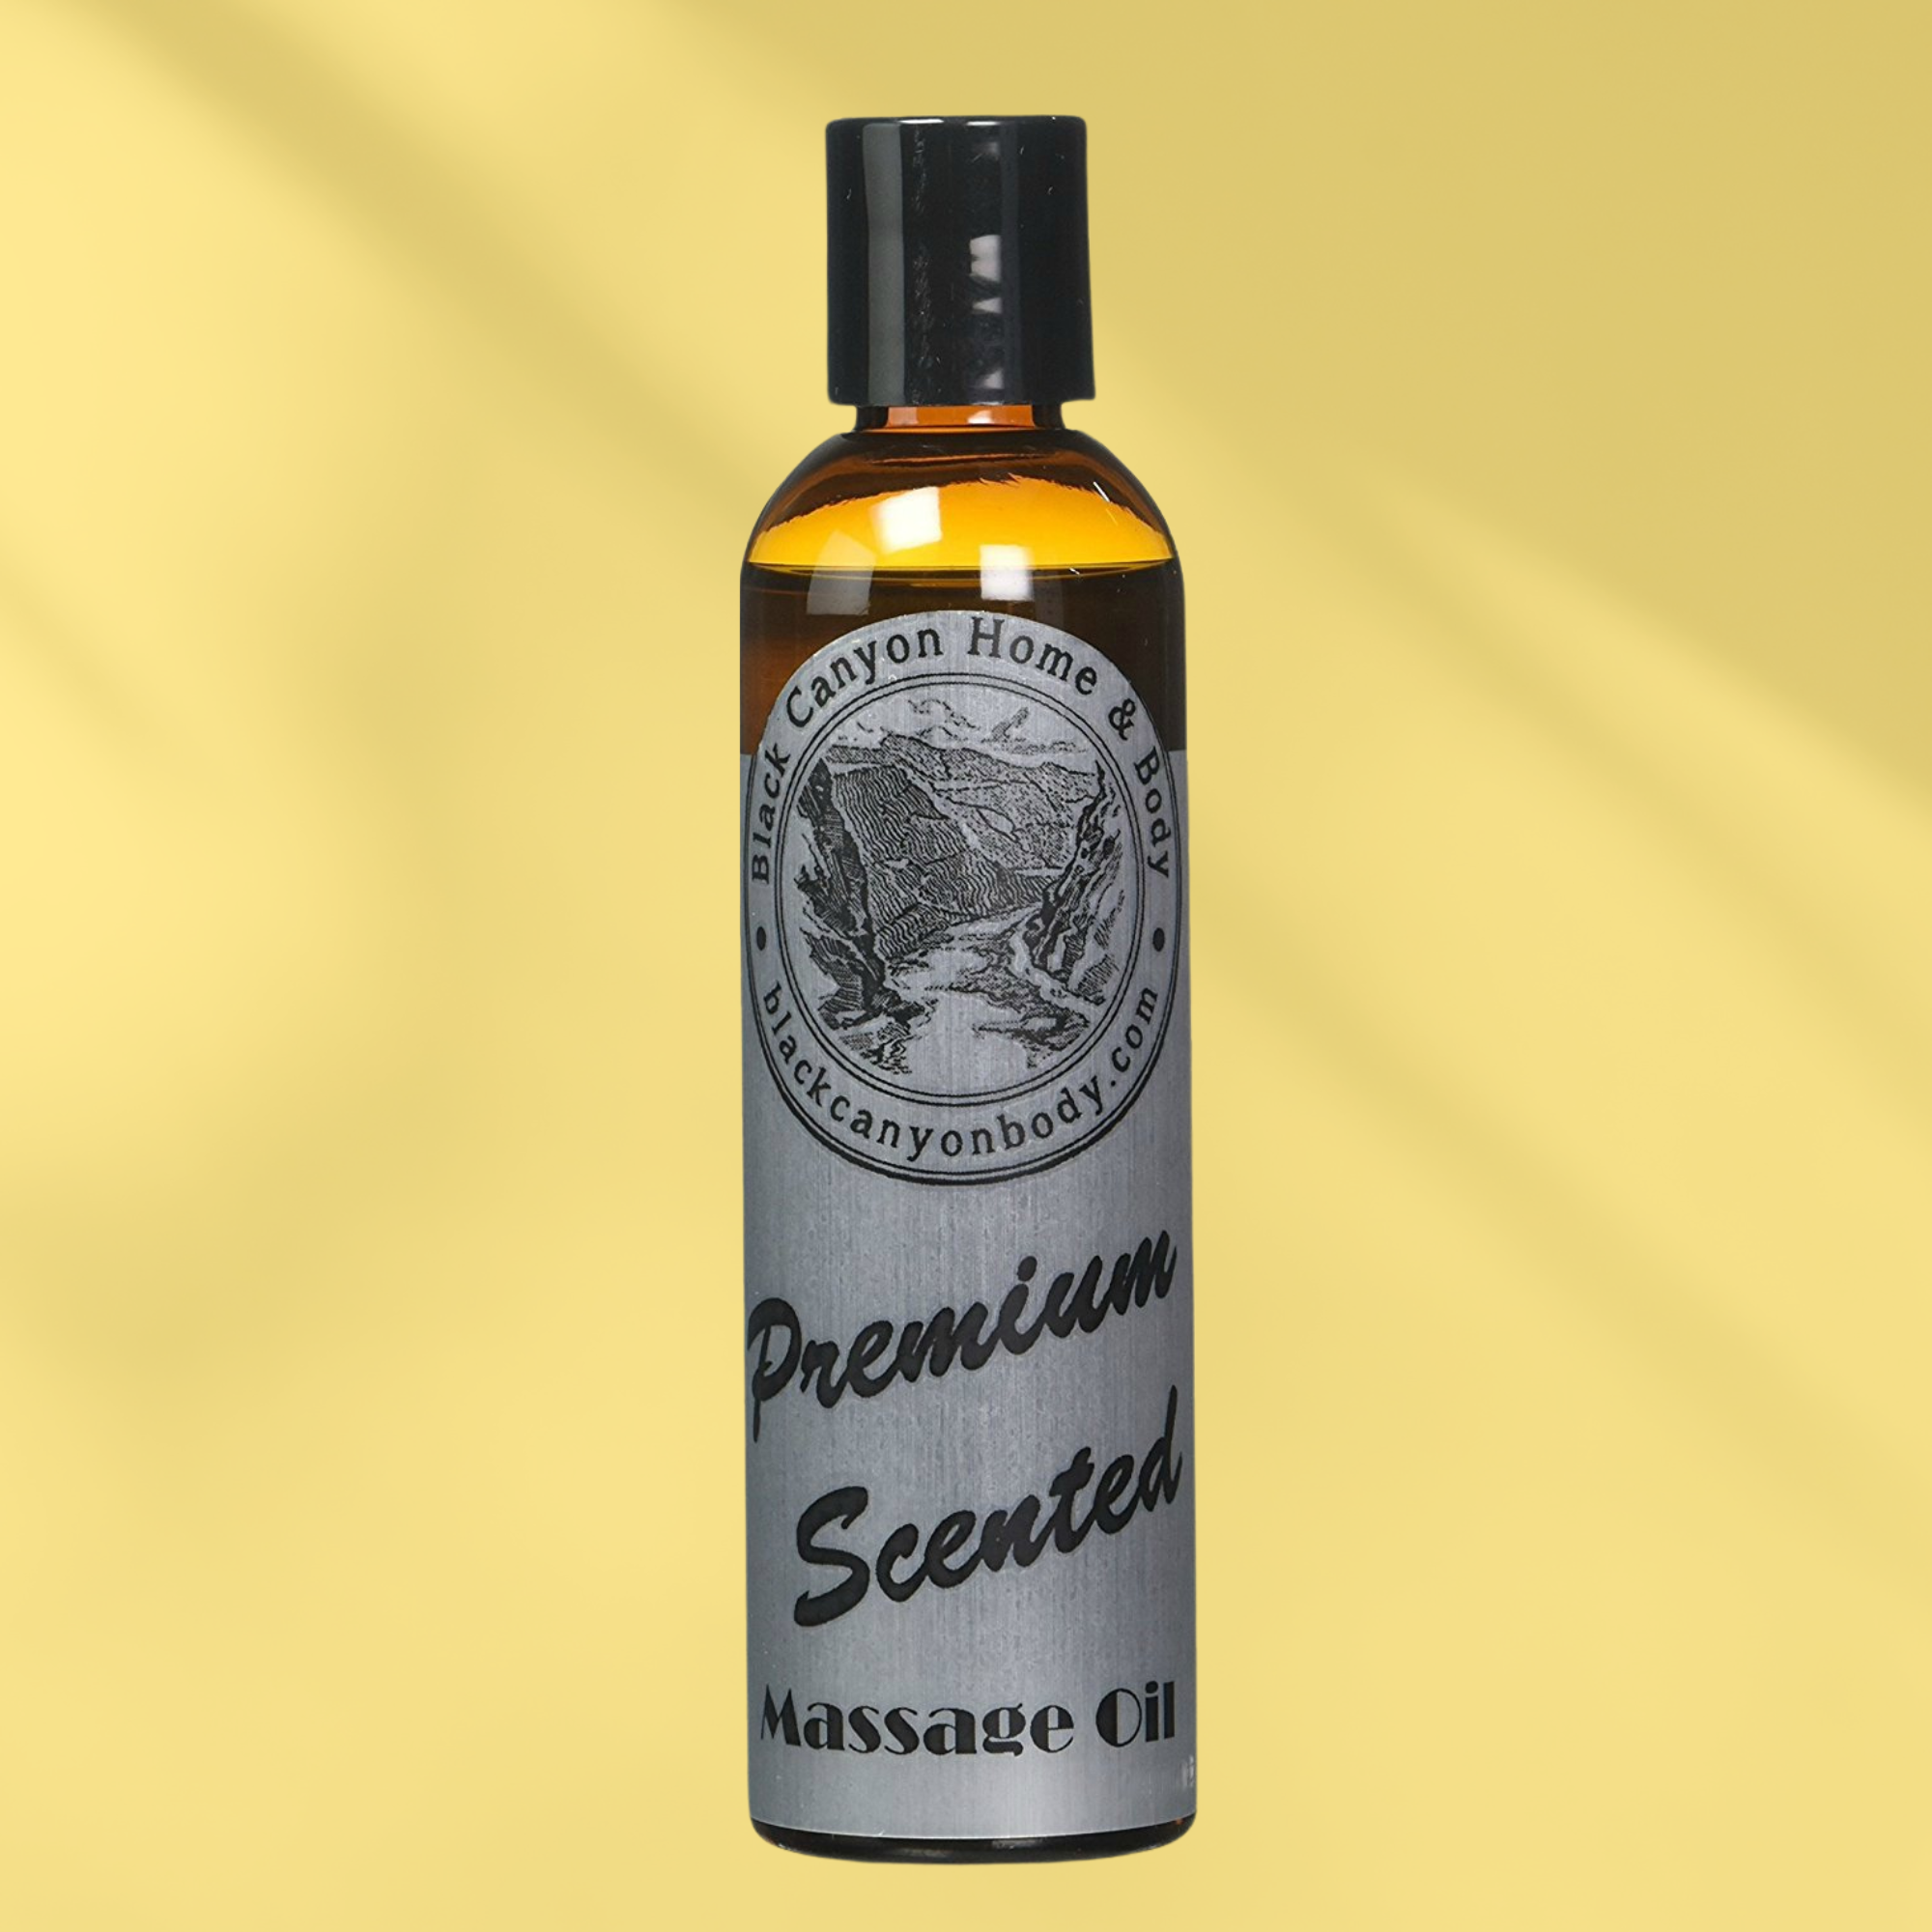 Black Canyon Honey & Apricot Scented Massage Oil